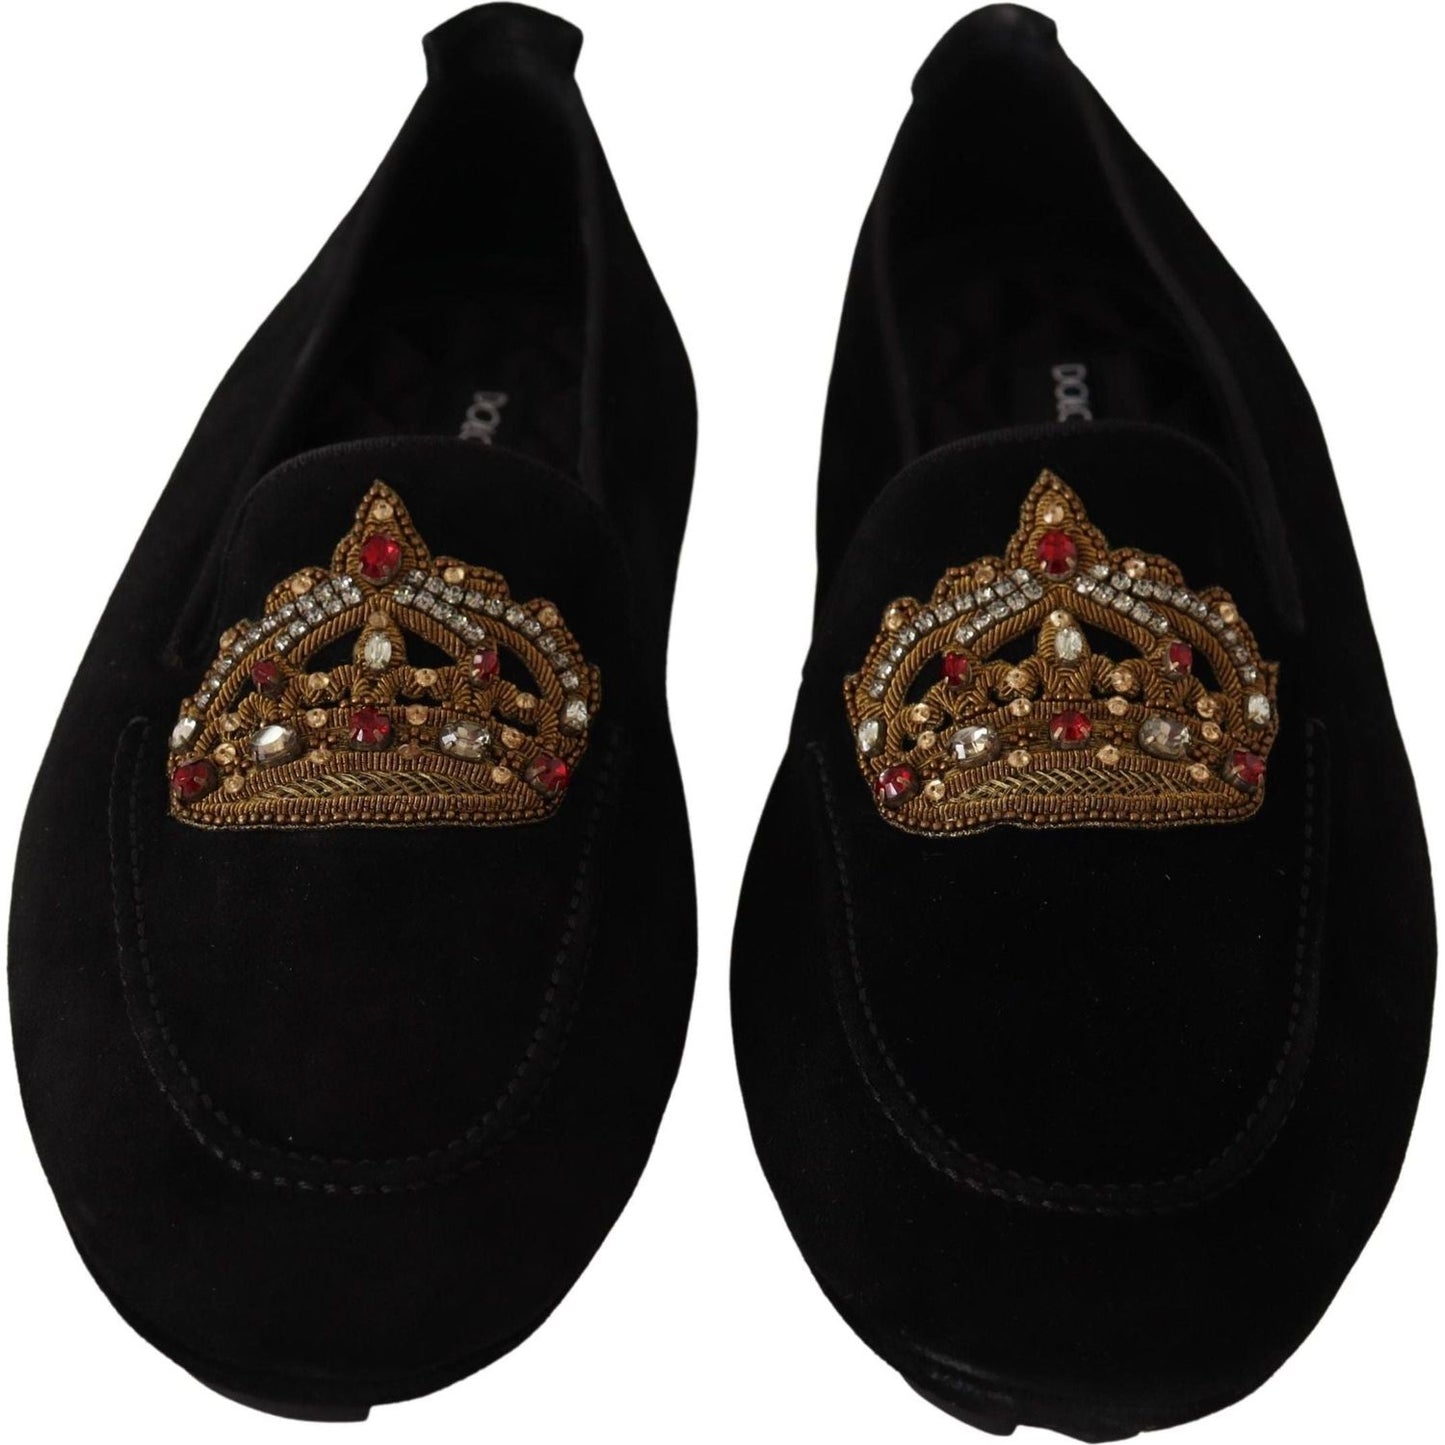 Dolce & Gabbana Elegant Black Leather Loafer Slides with Gold Embroidery black-leather-crystal-gold-crown-loafers-shoes IMG_5284-5591c34e-0c8.jpg